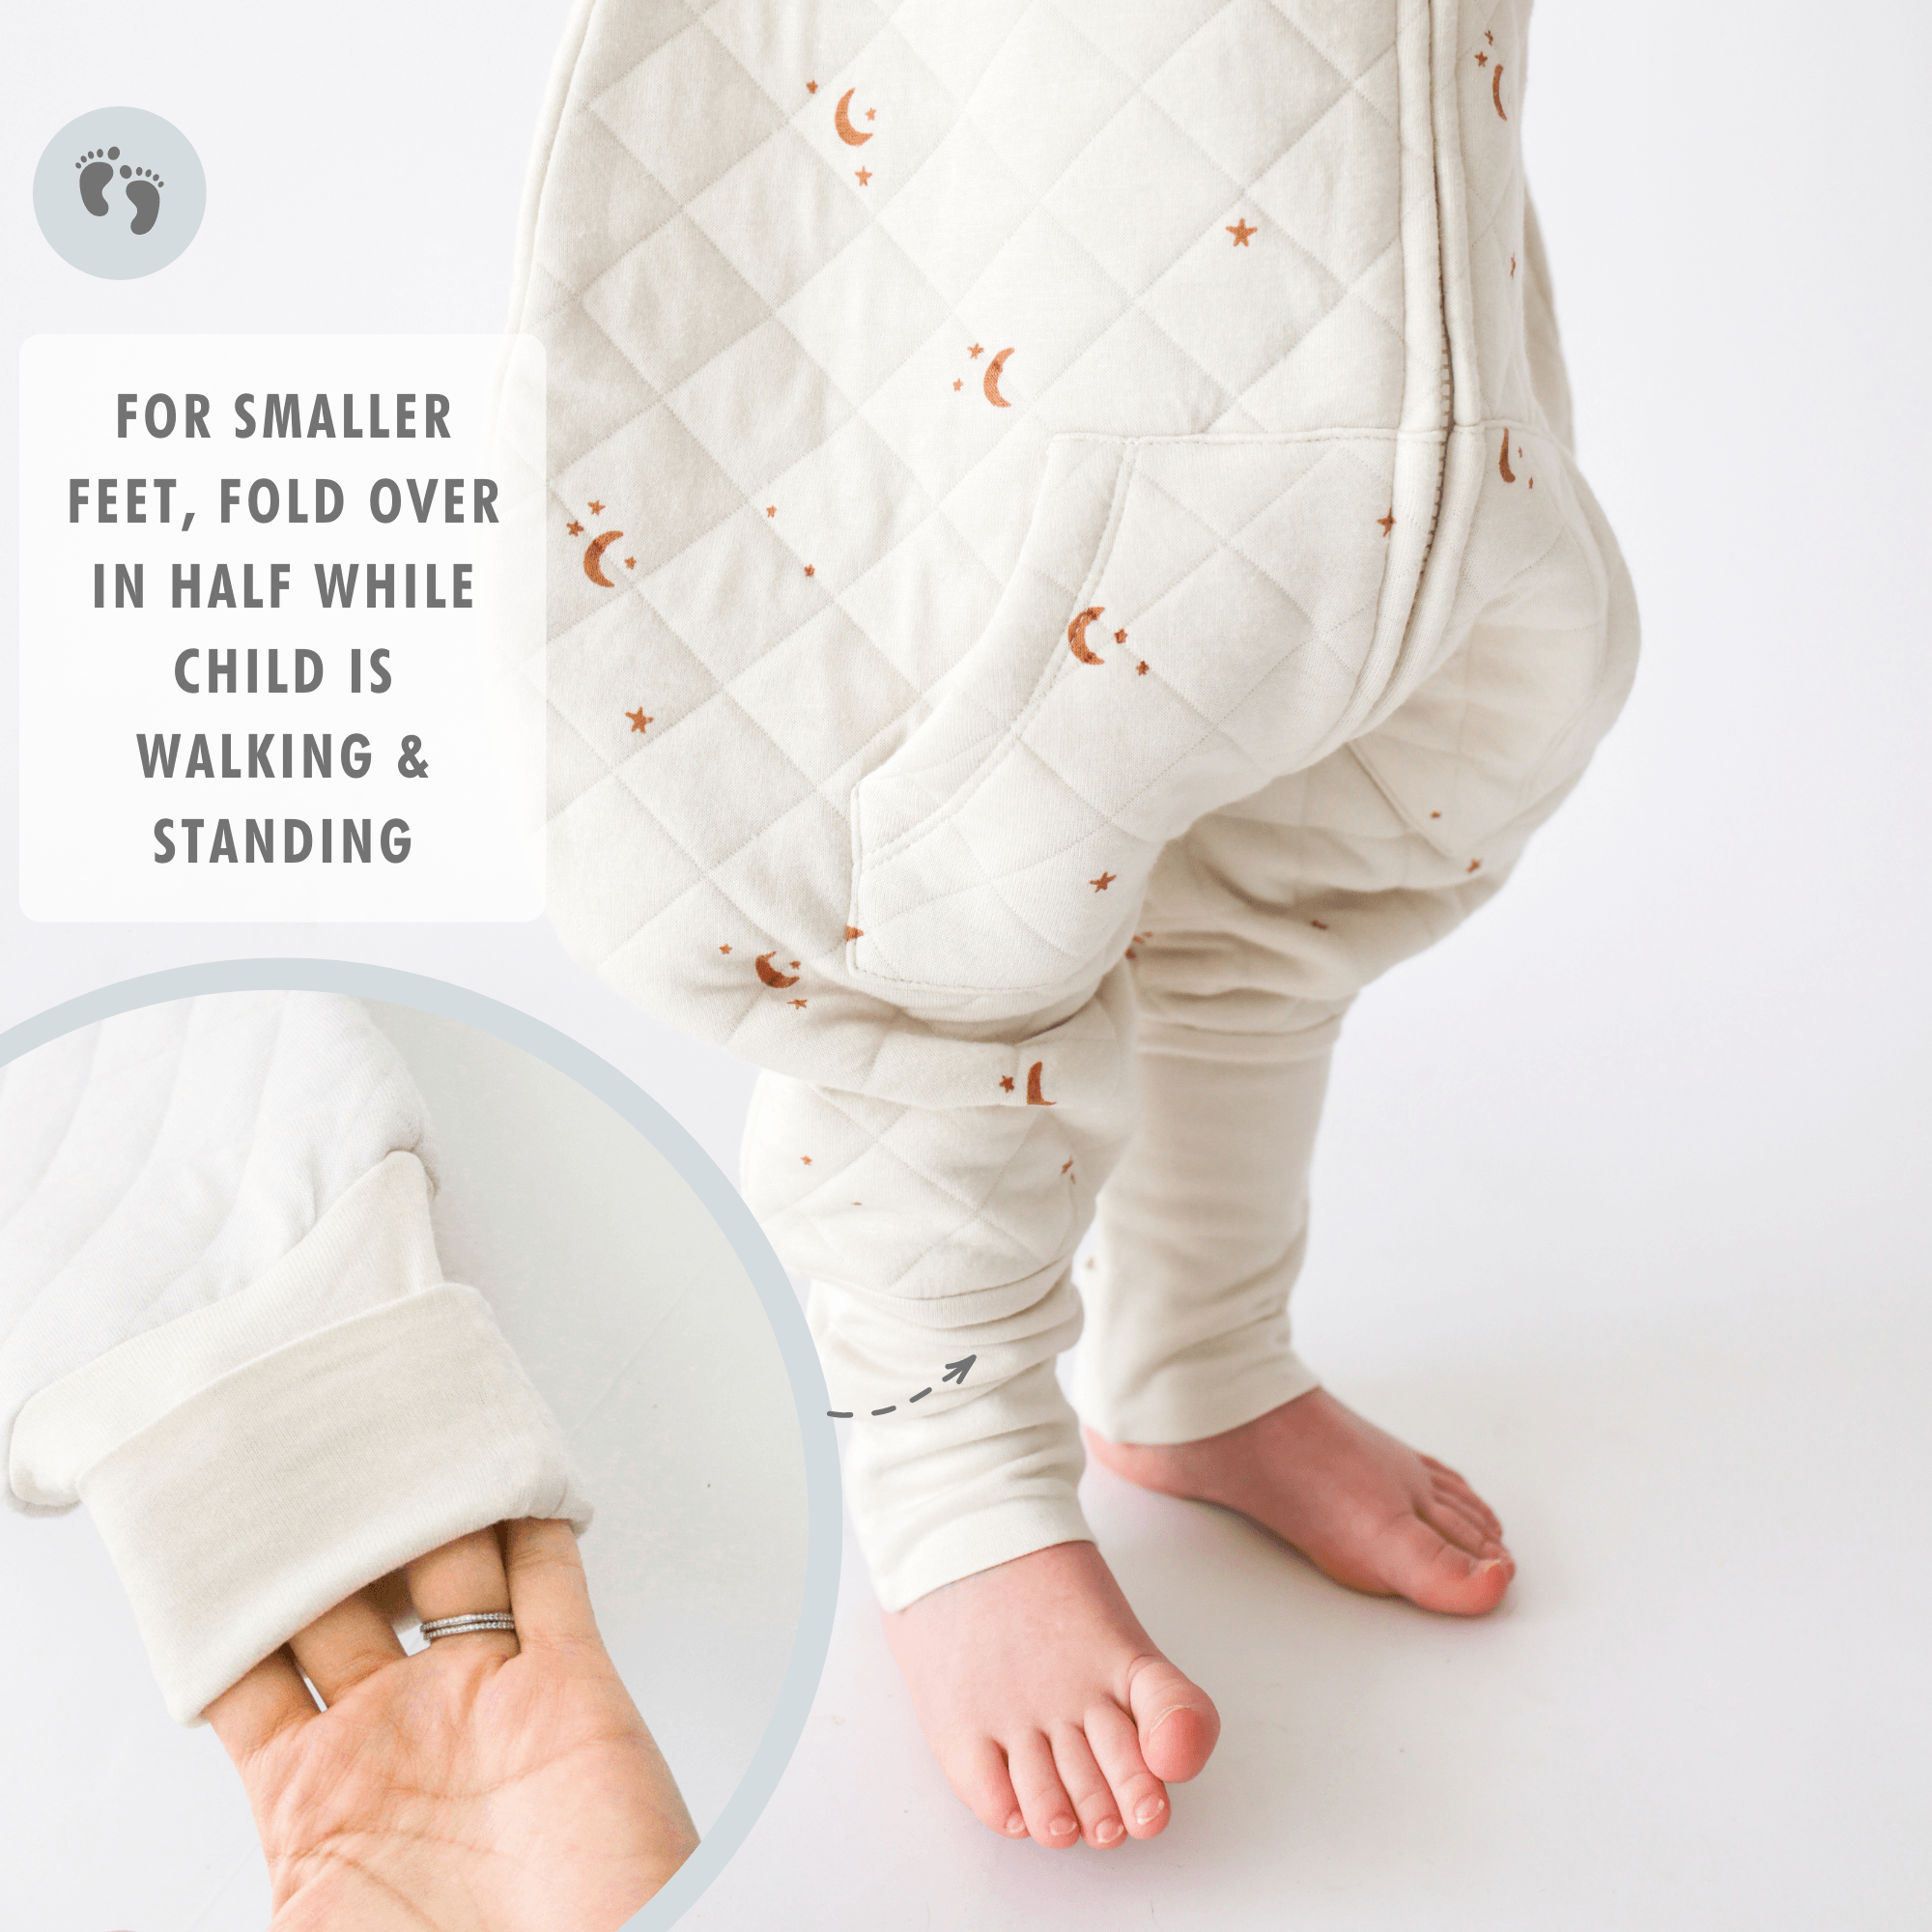 Tealbee Dreamsie. for smaller feet, fold over in half while child is walking and standing